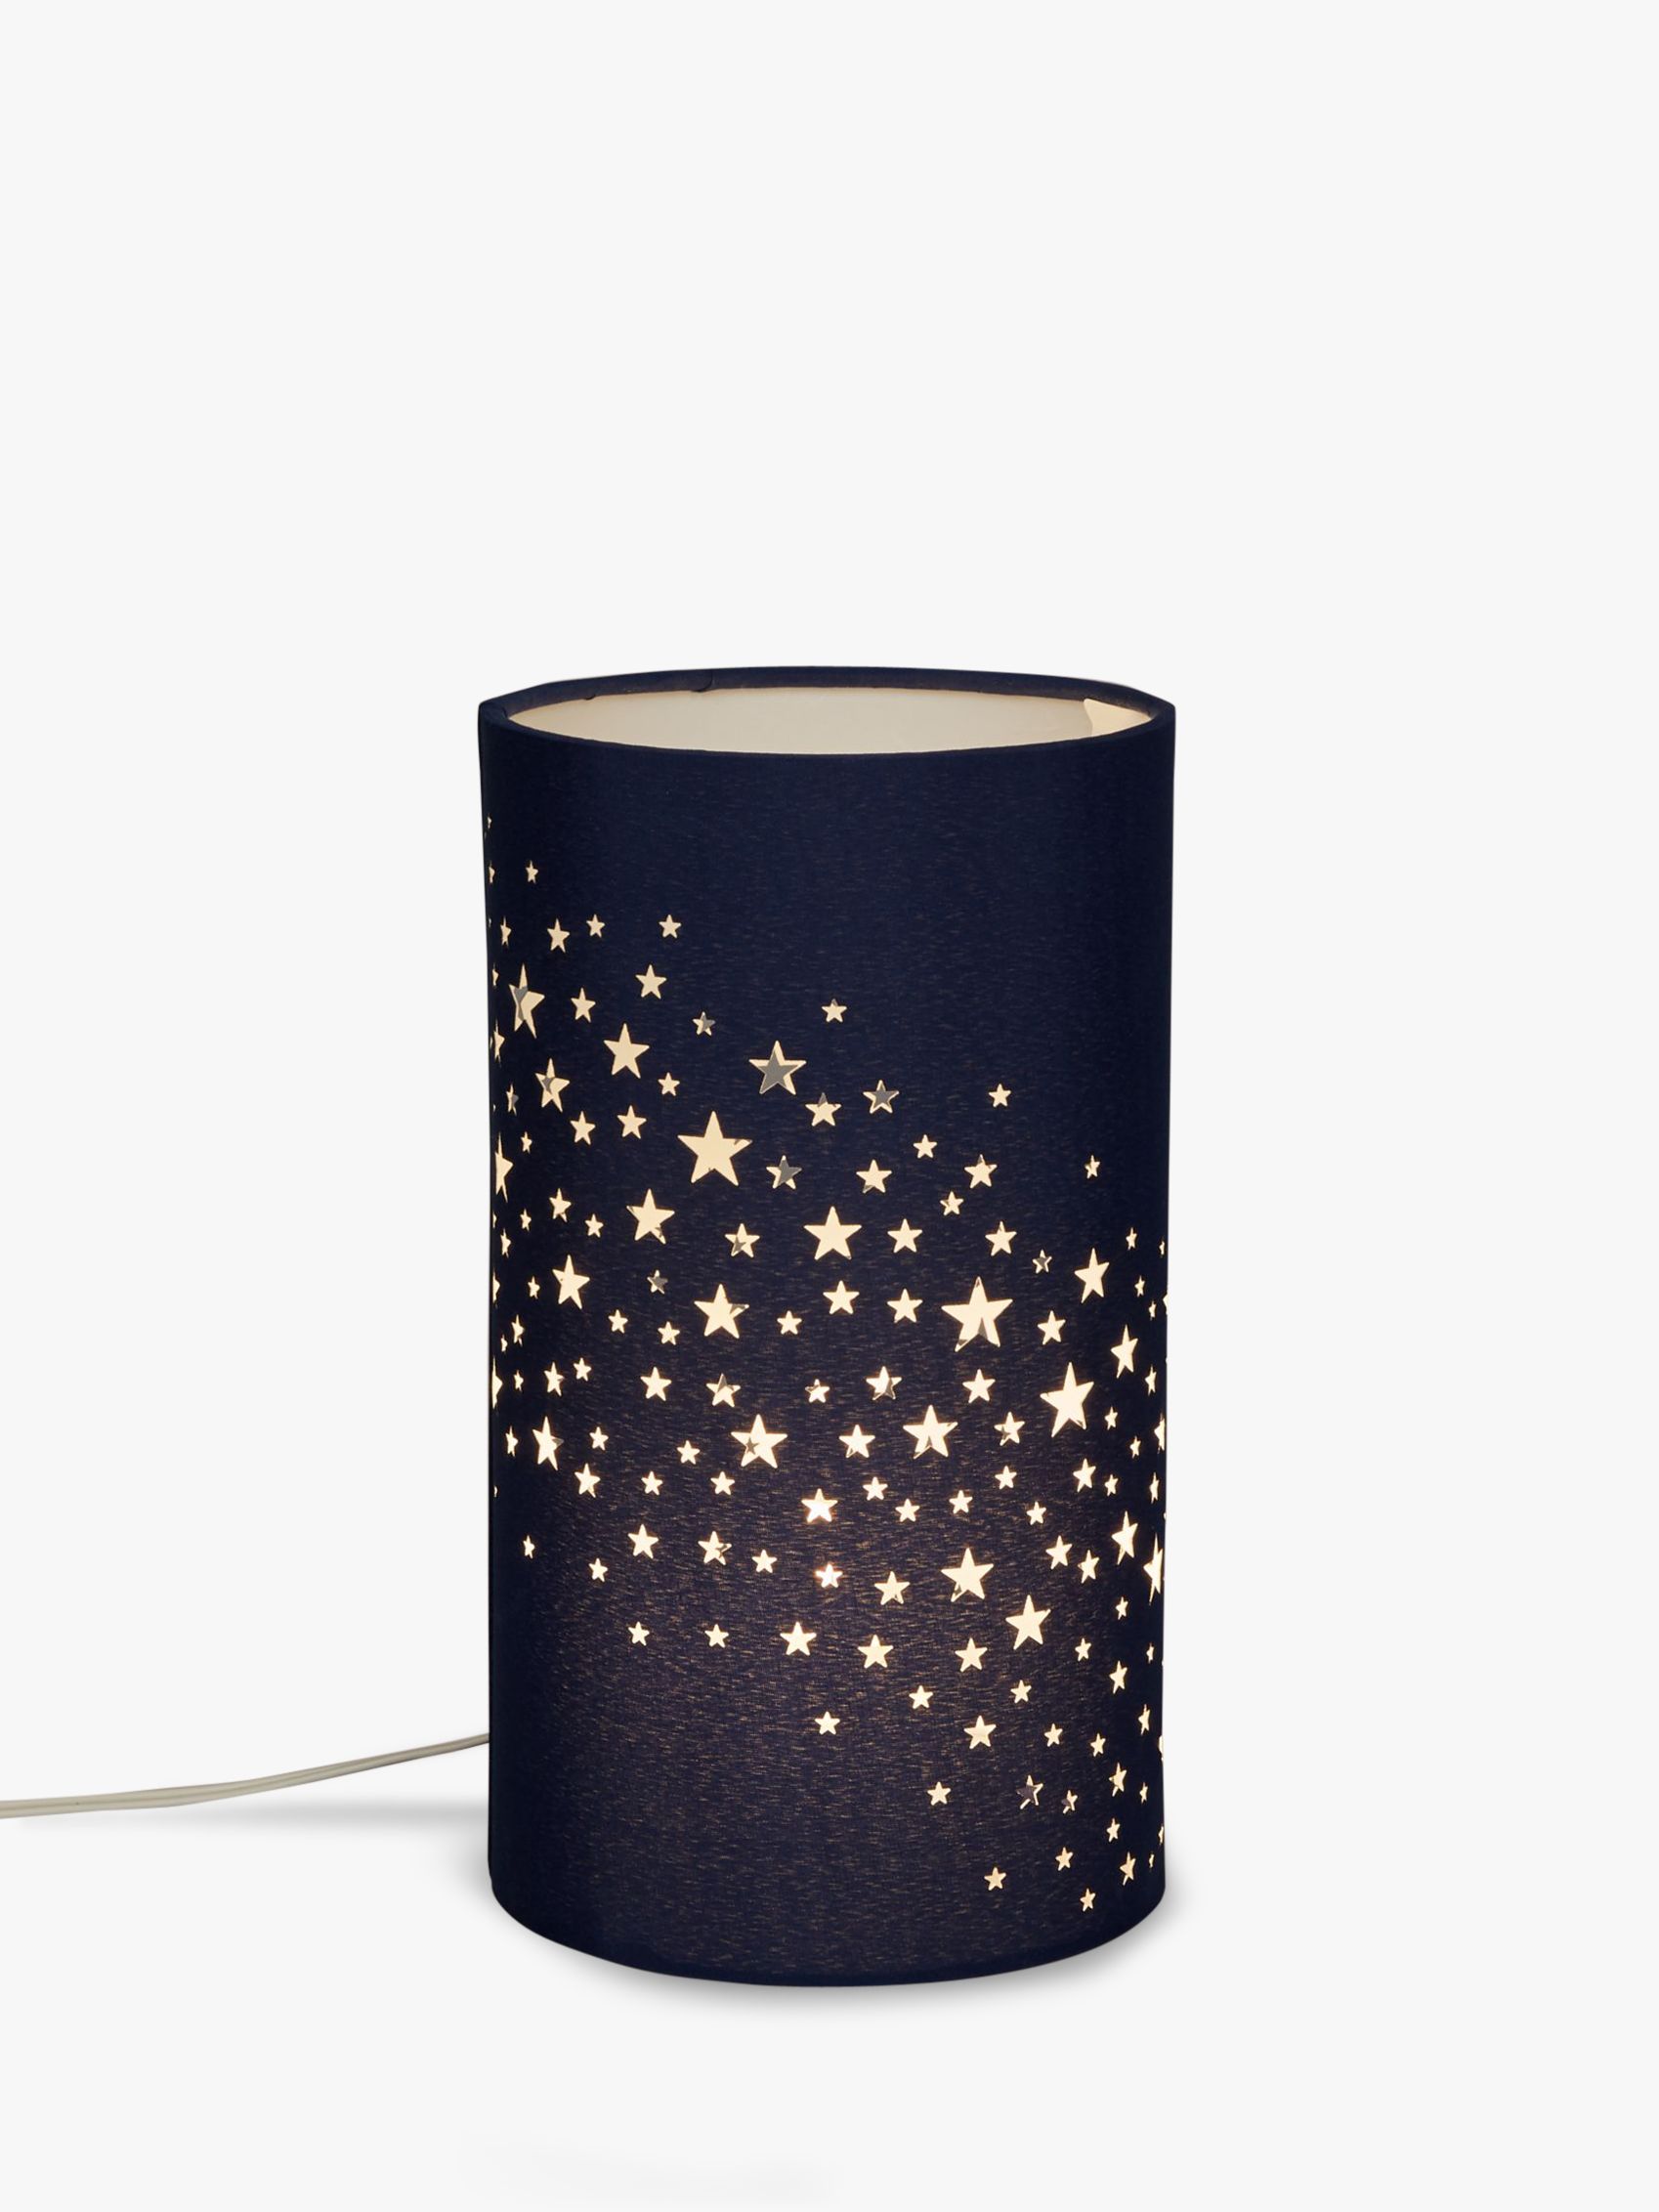 Photo of Little home at john lewis stardust table lamp